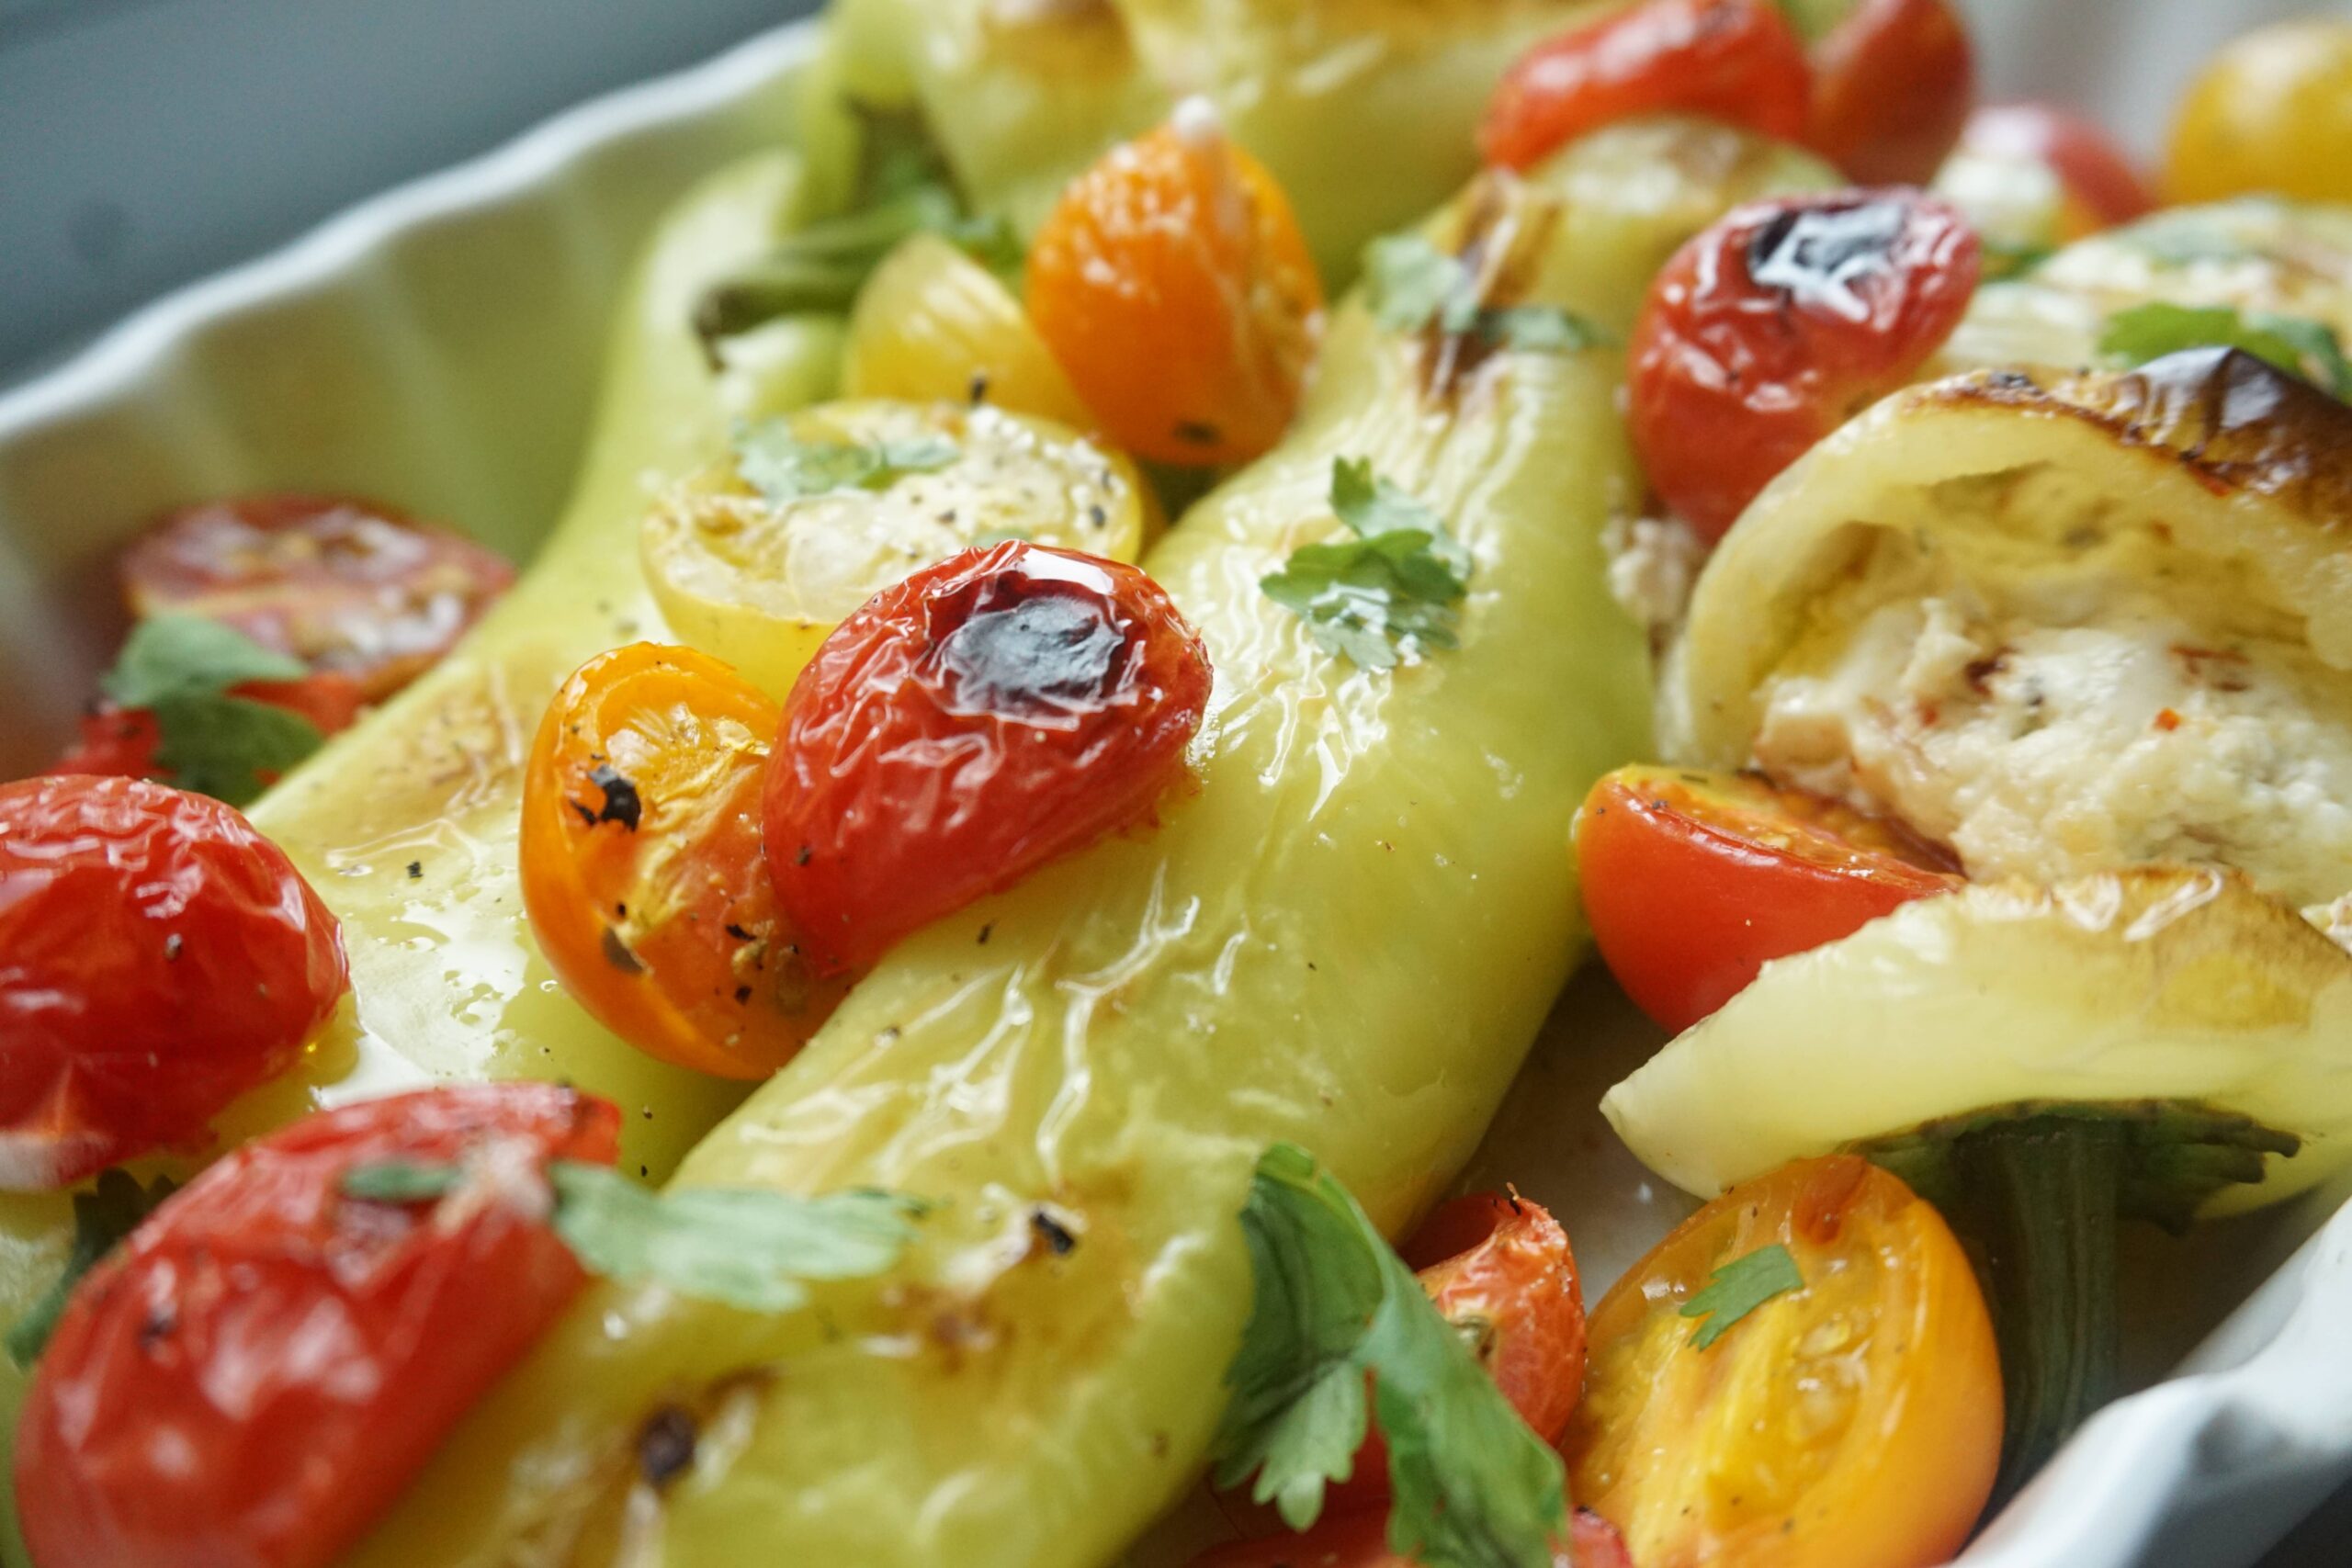 Try This Colorful Feta Stuffed Banana Pepper Recipe to Impress Your Friends